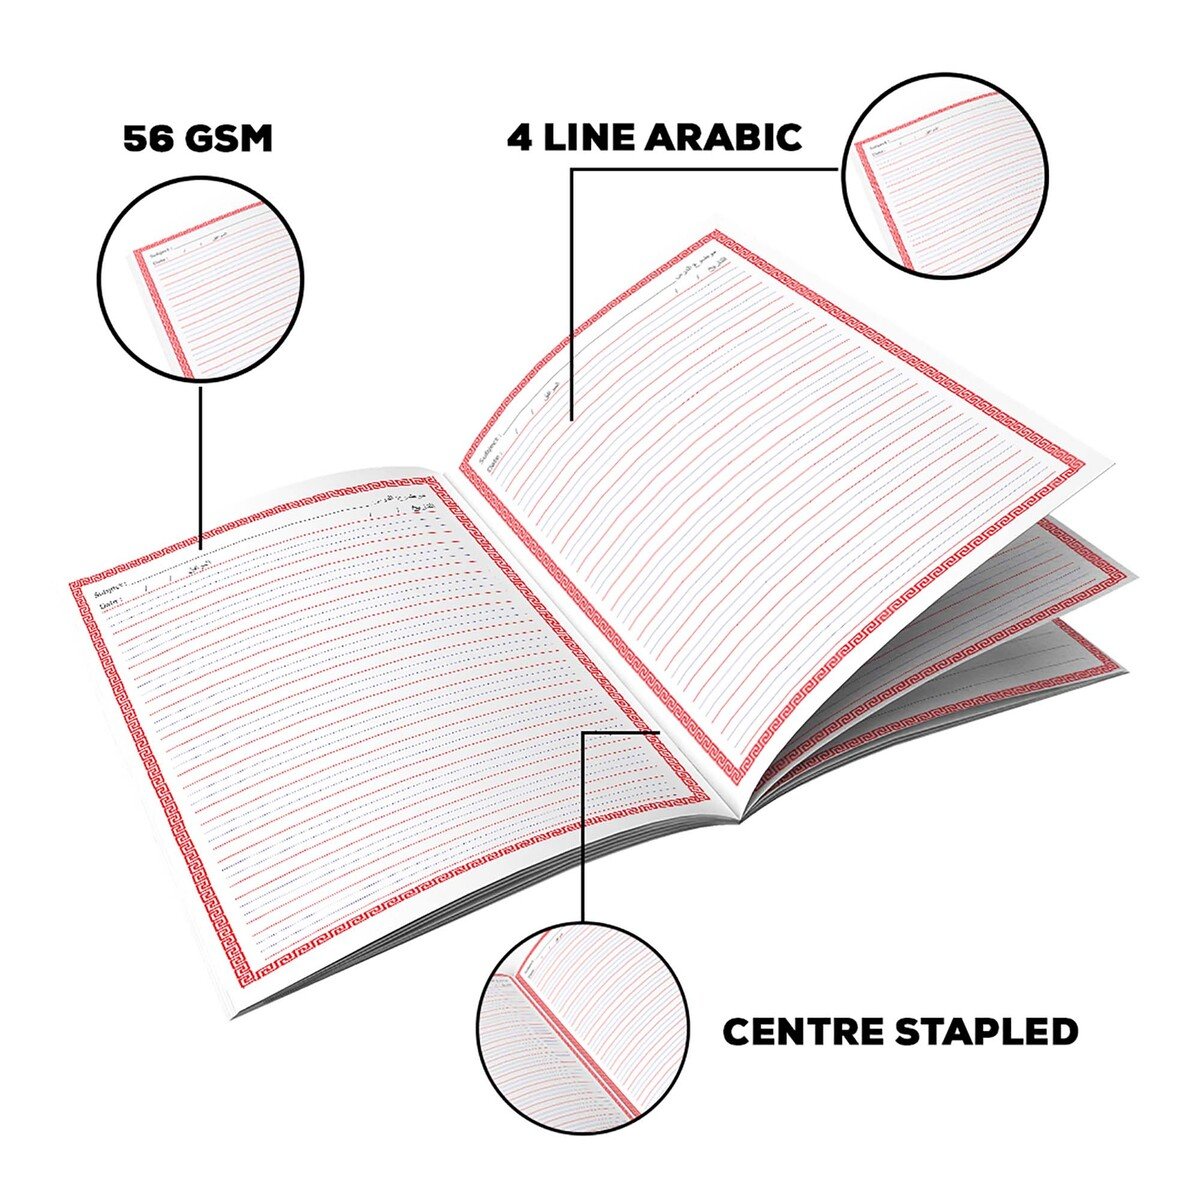 Classmate Exercise Book Centre Stapled 220x160mm 56-GSM 4 Line (Arabic) 120 Pages Assorted